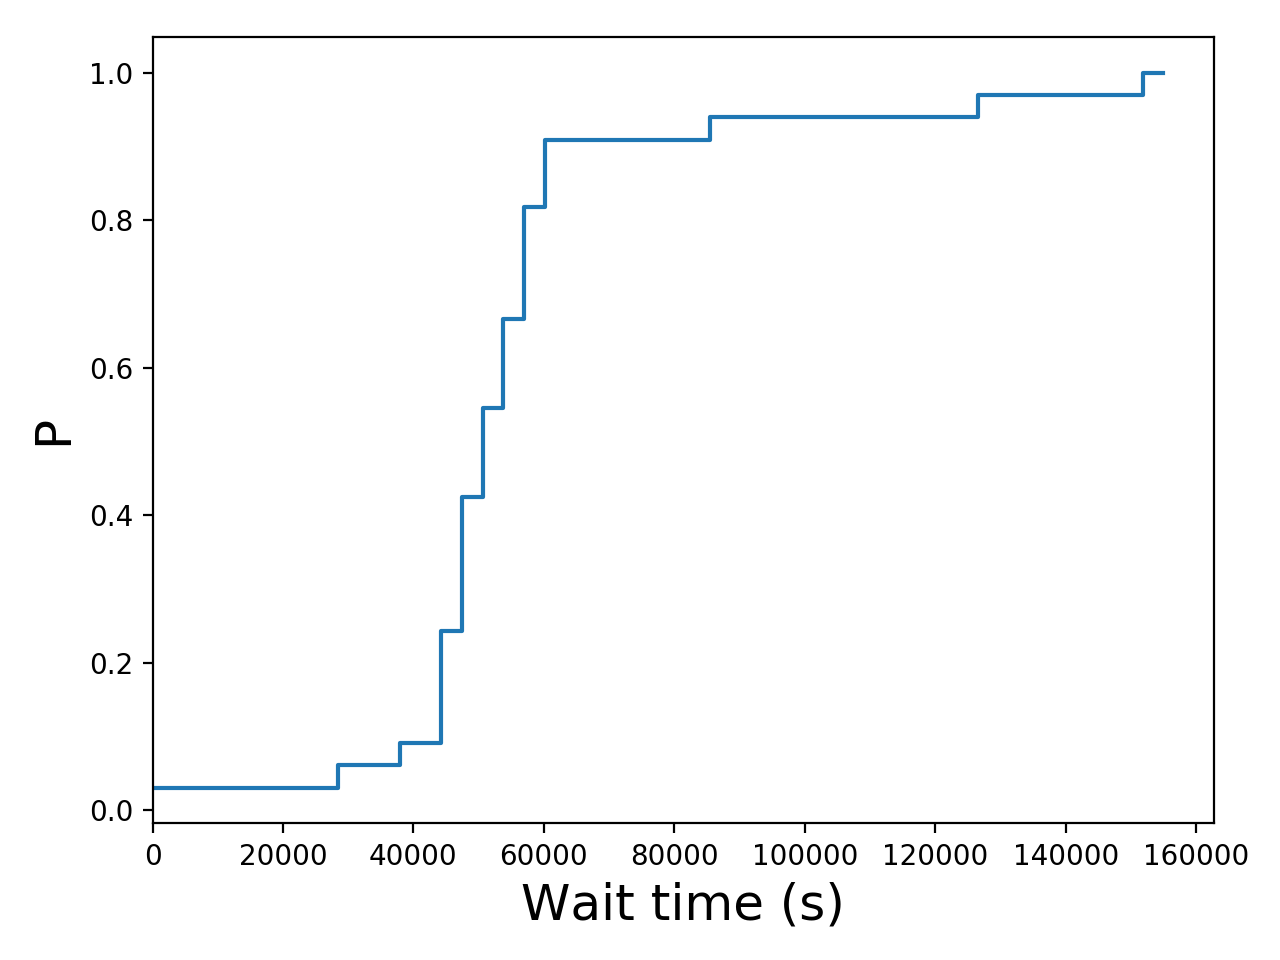 Task wait time CDF graph for the Pegasus_P4 trace.